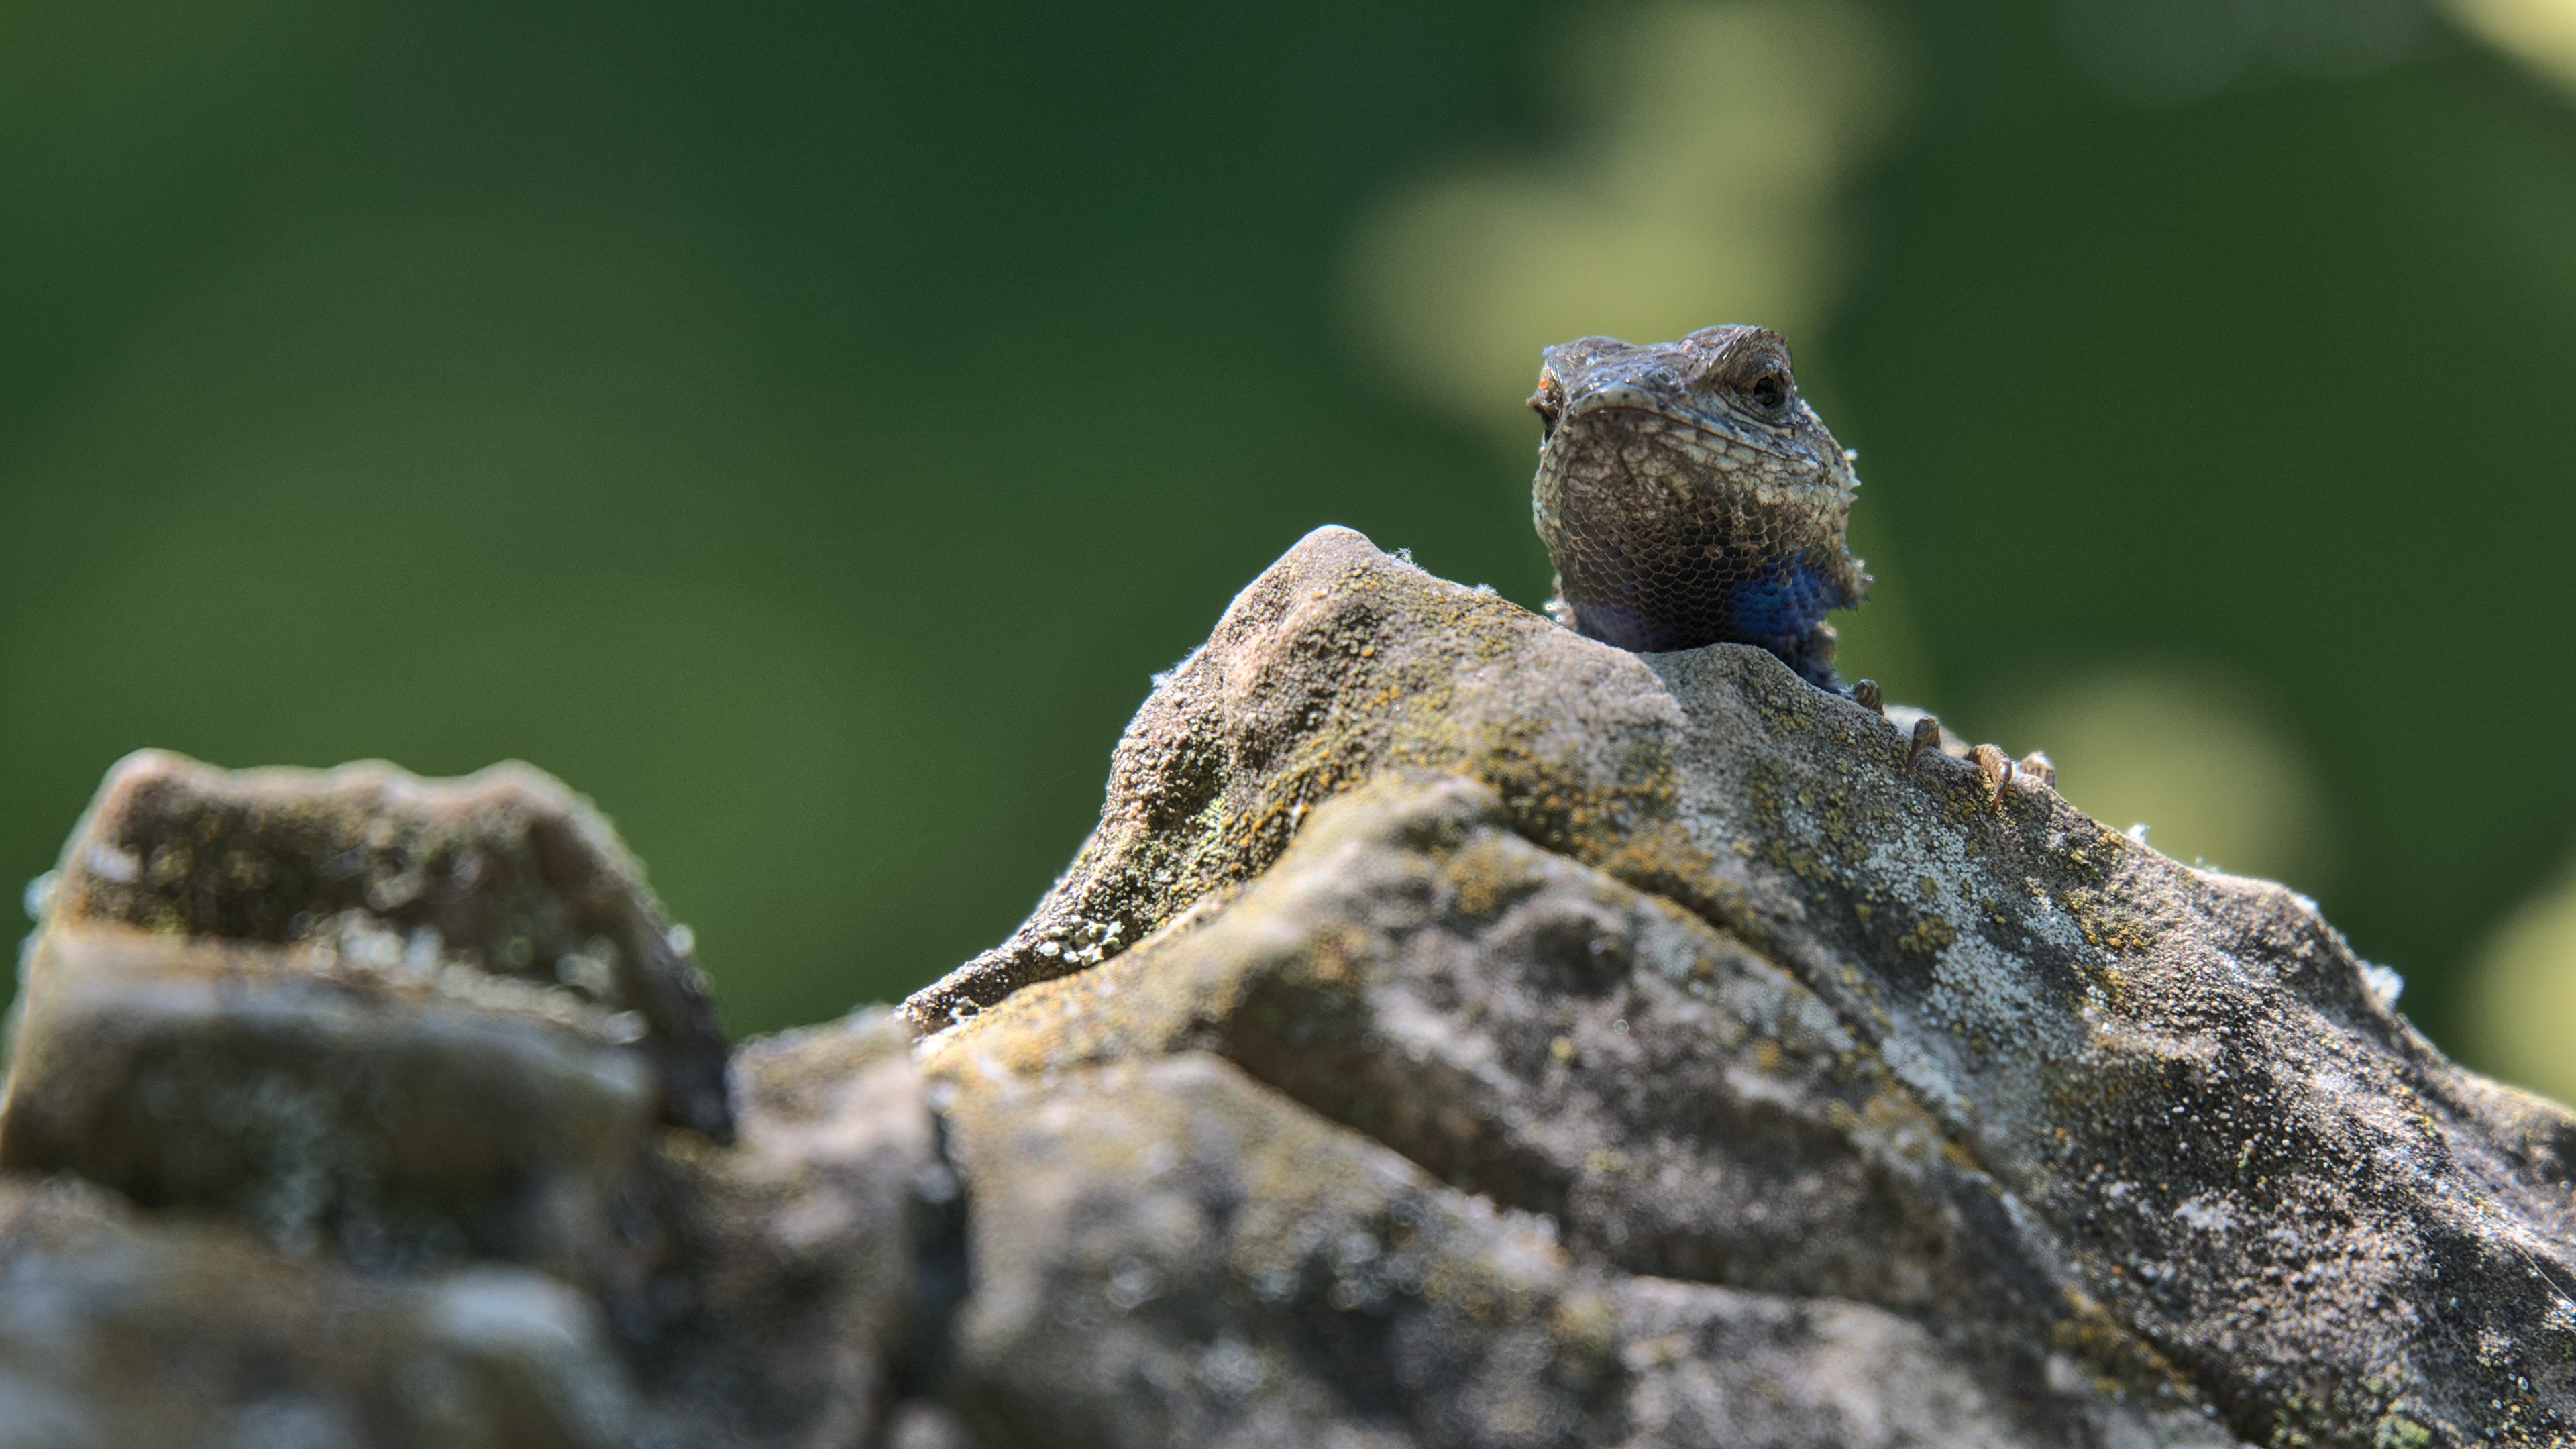 A lizard emerges from behind a rock